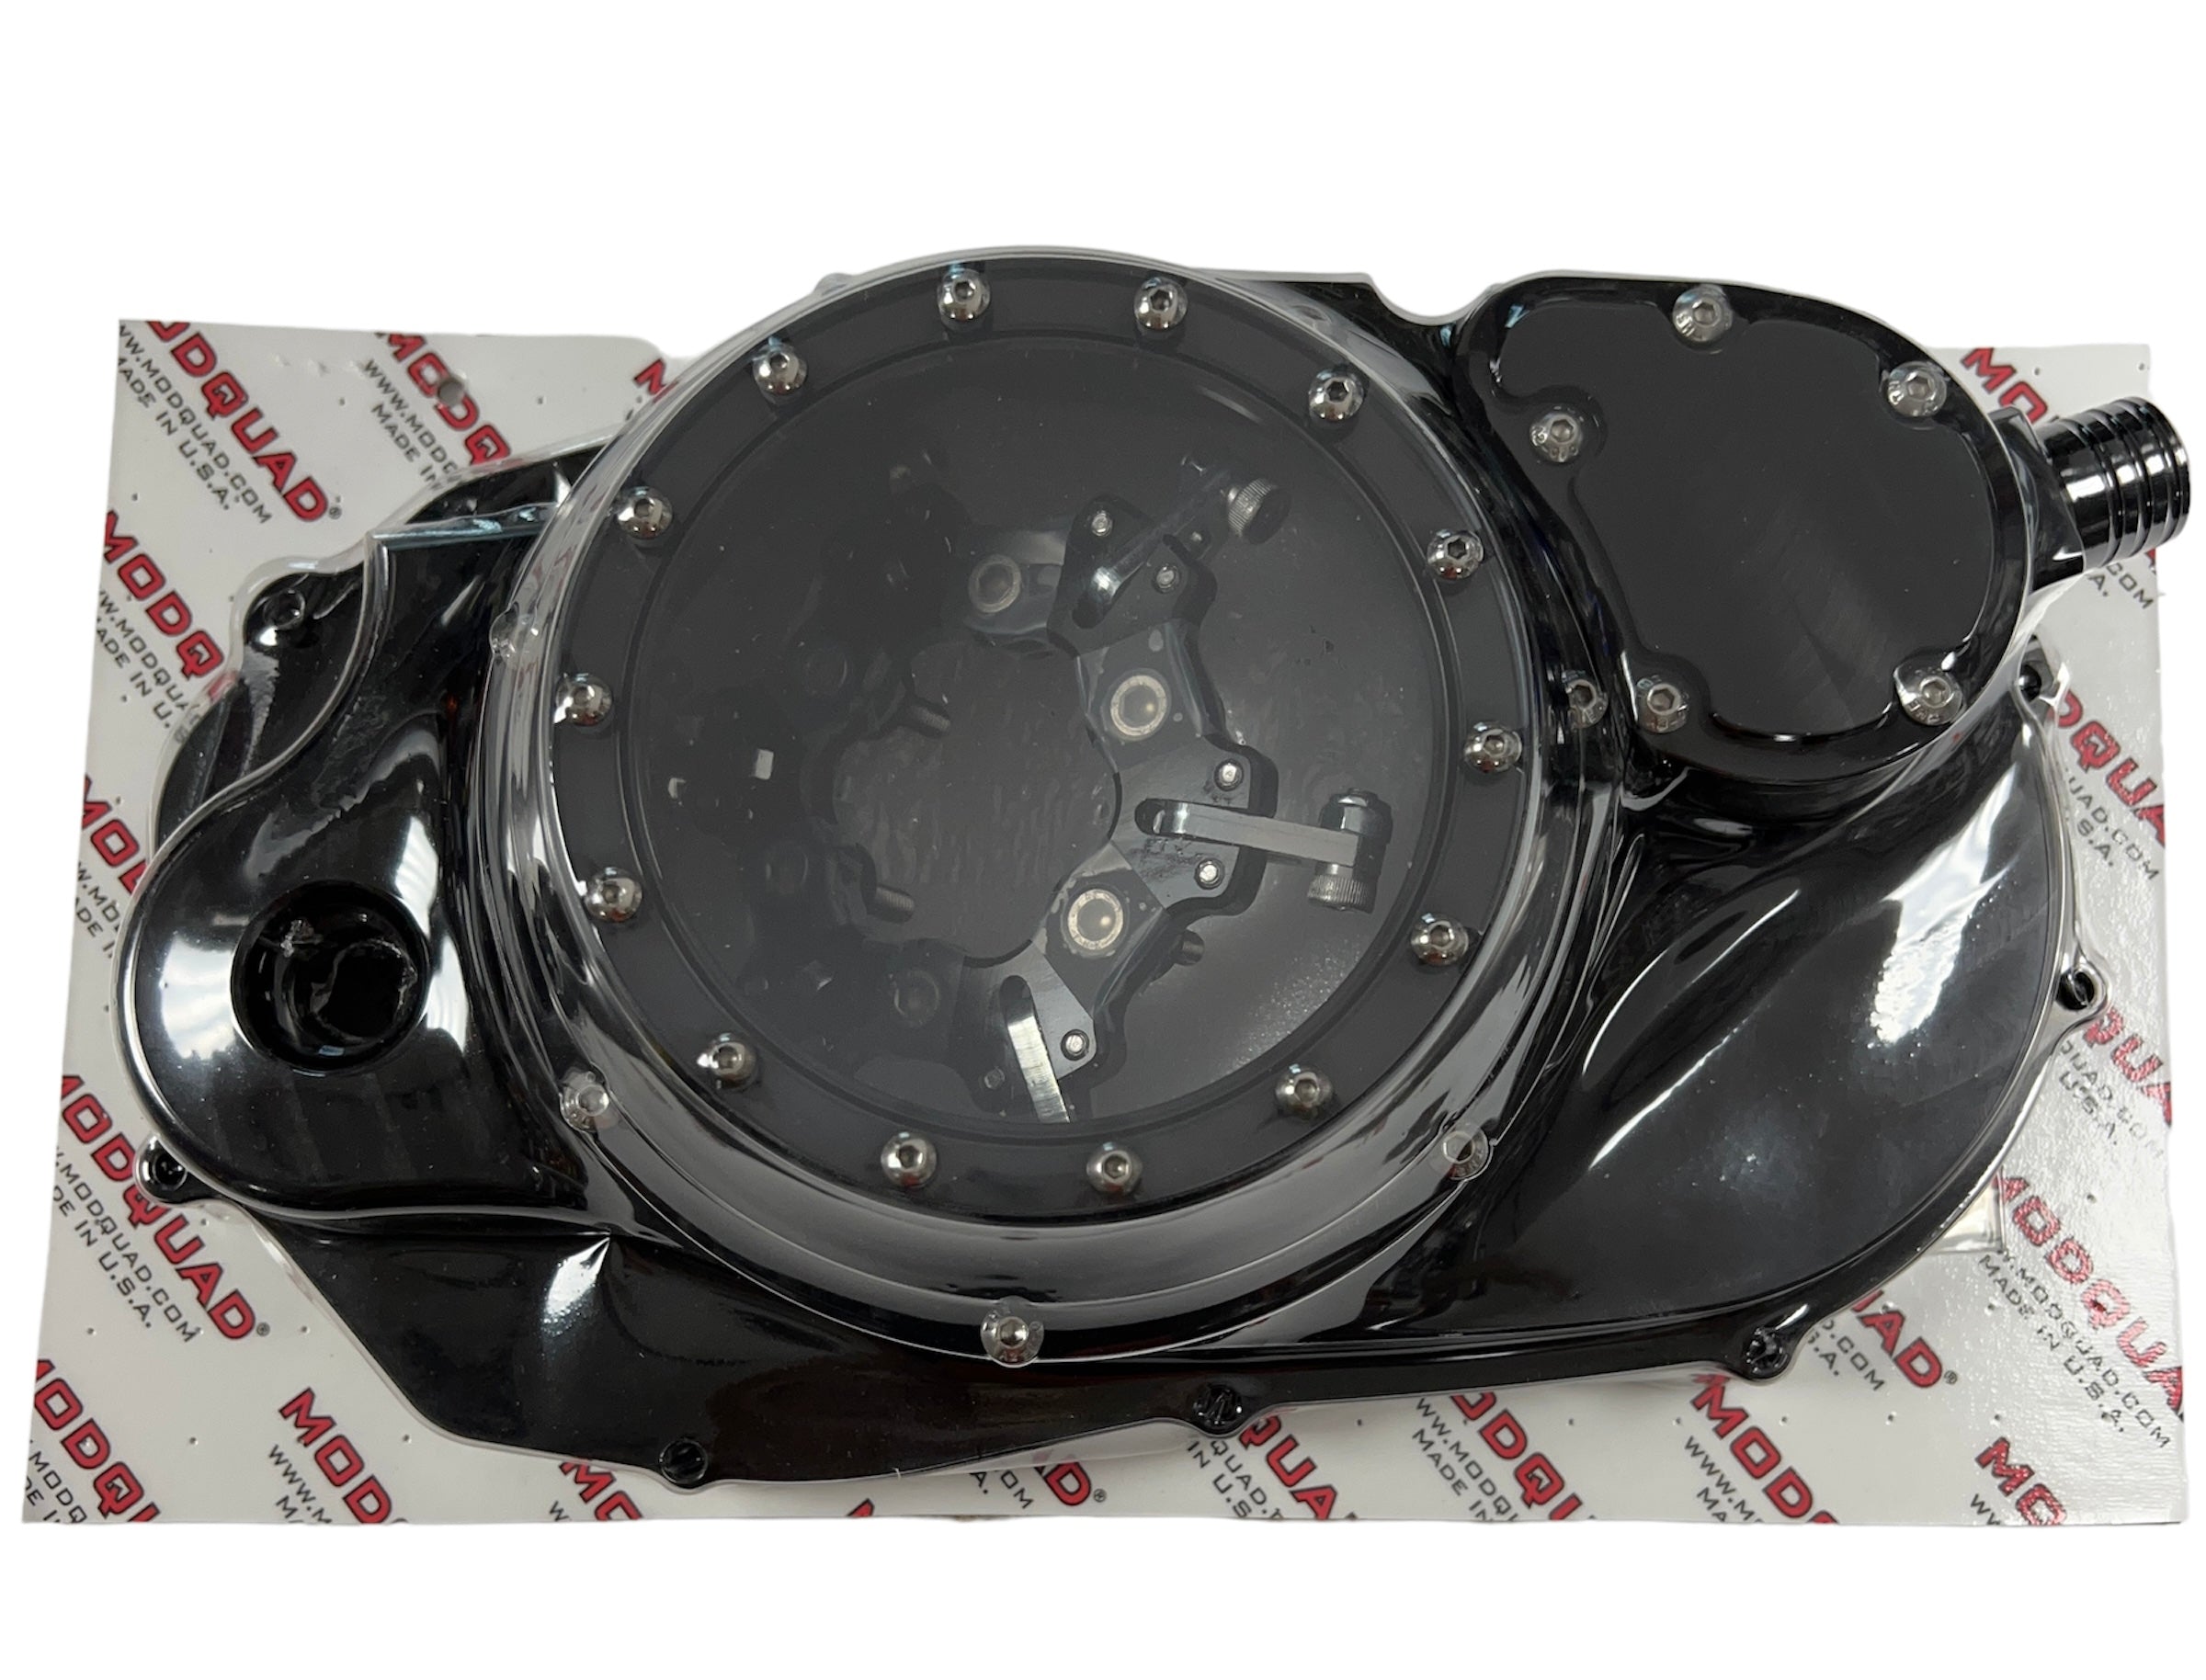 Banshee lockout clutch cover